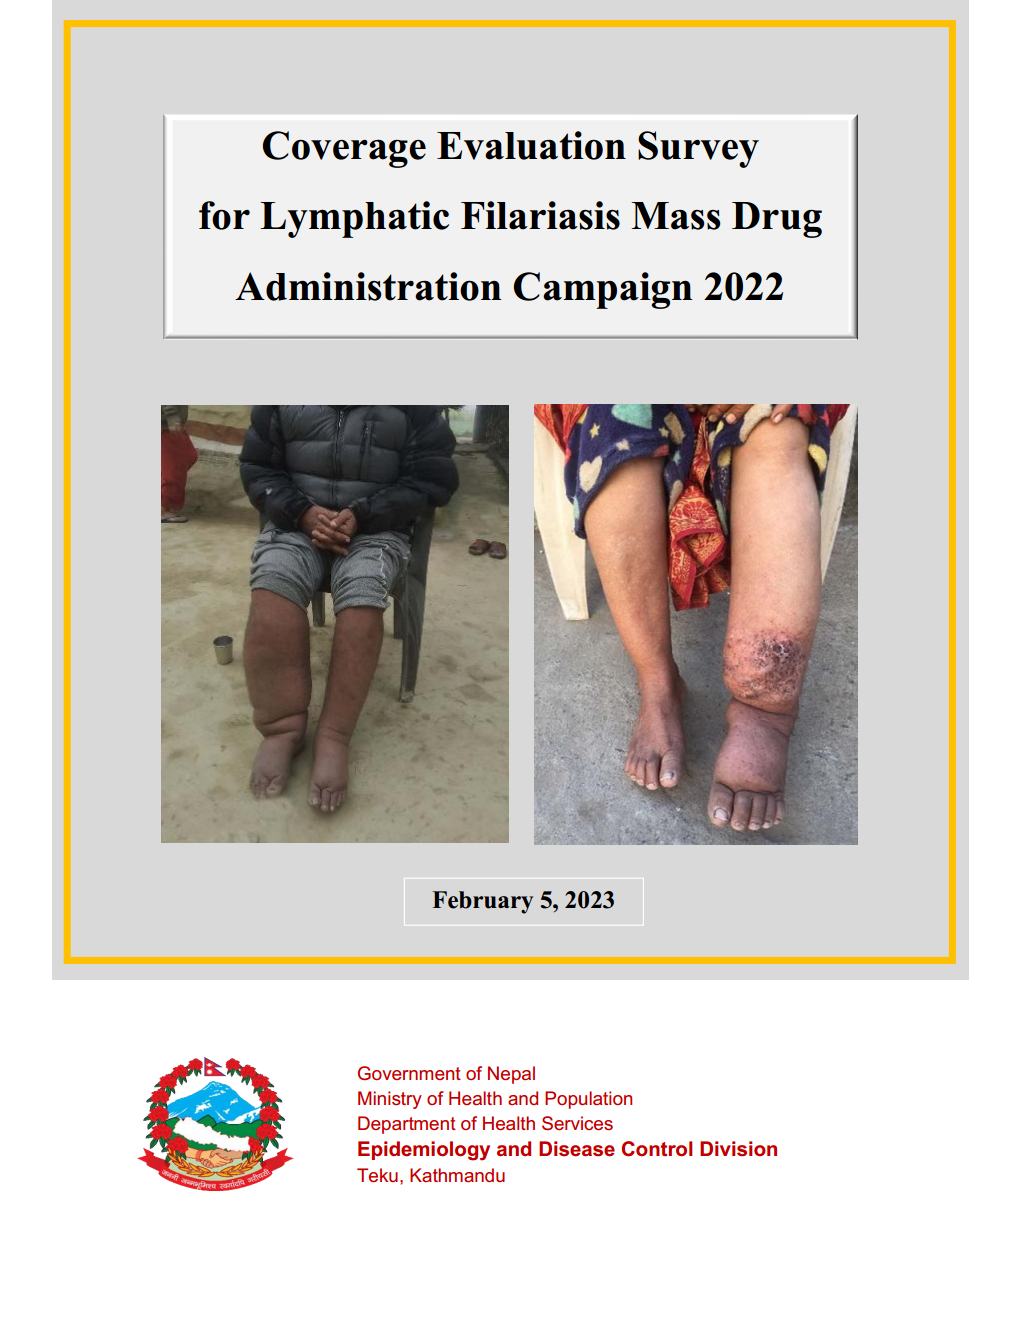 Coverage Evaluation Survey for Lymphatic Filariasis Mass Drug Administration Campaign, 2022